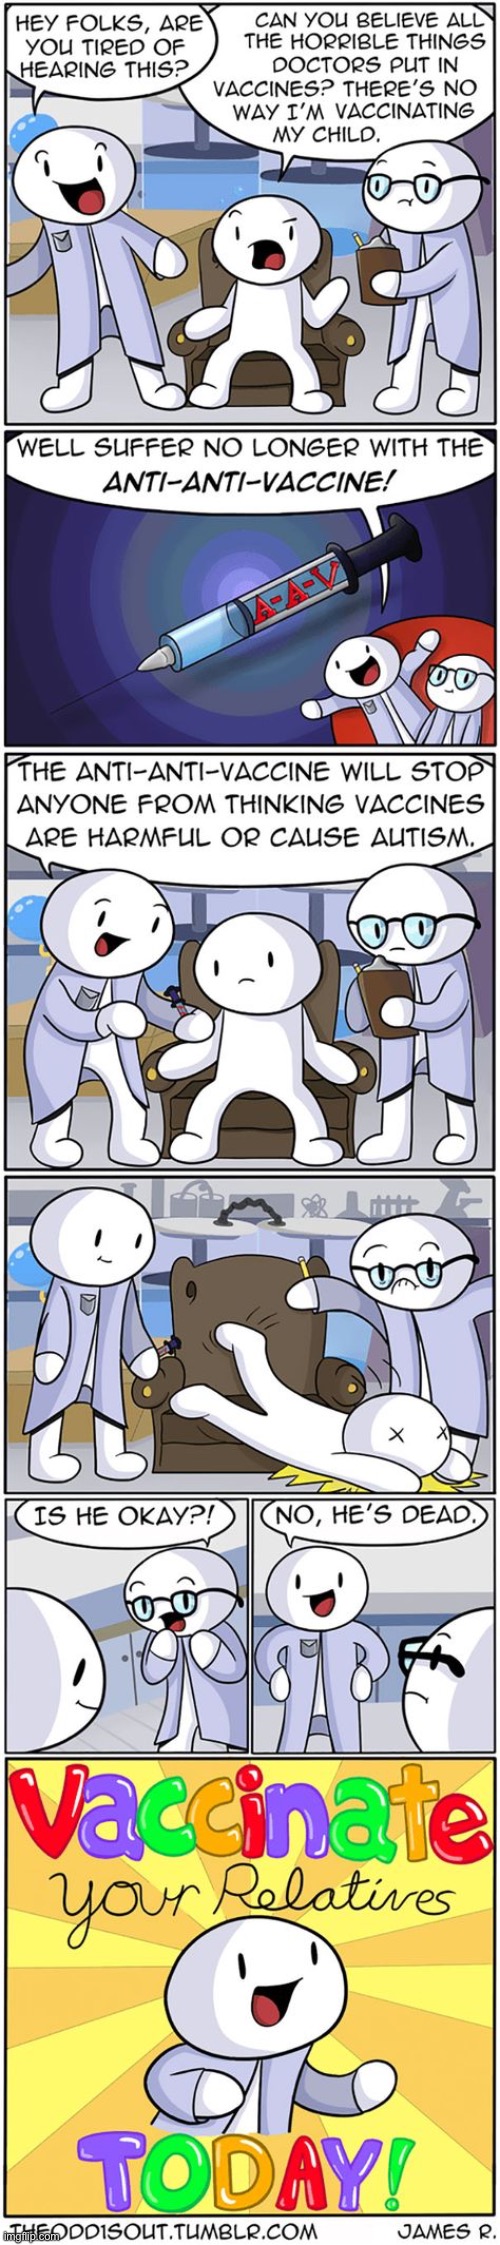 915 | image tagged in vaccines,vaccination,death,comics,comics/cartoons,theodd1sout | made w/ Imgflip meme maker